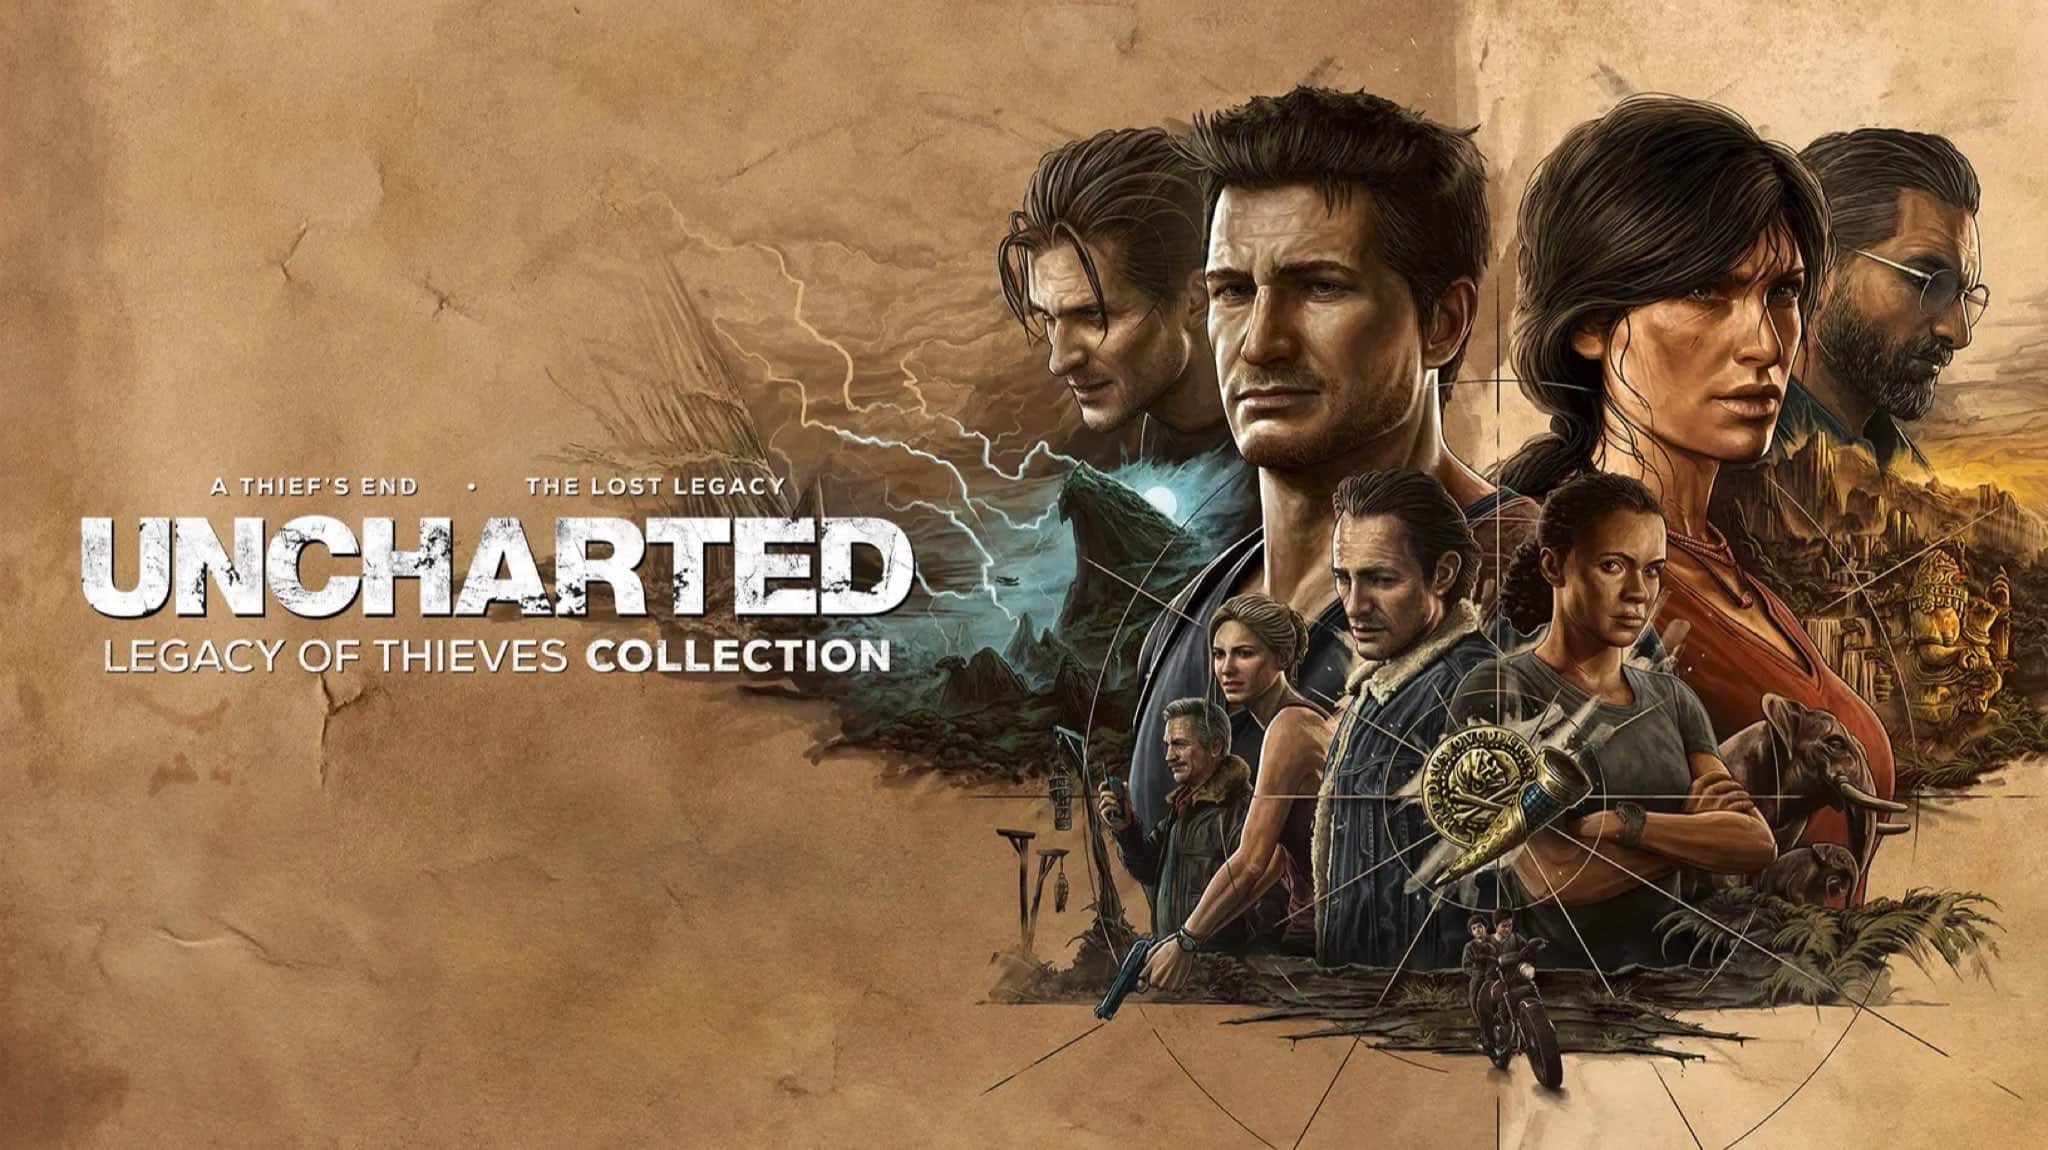 New ends 5. Анчартед наследие воров. Uncharted™: наследие воров. Коллекция. Uncharted Legacy of Thieves collection Постер. Uncharted Legacy of Thieves collection на ПК.